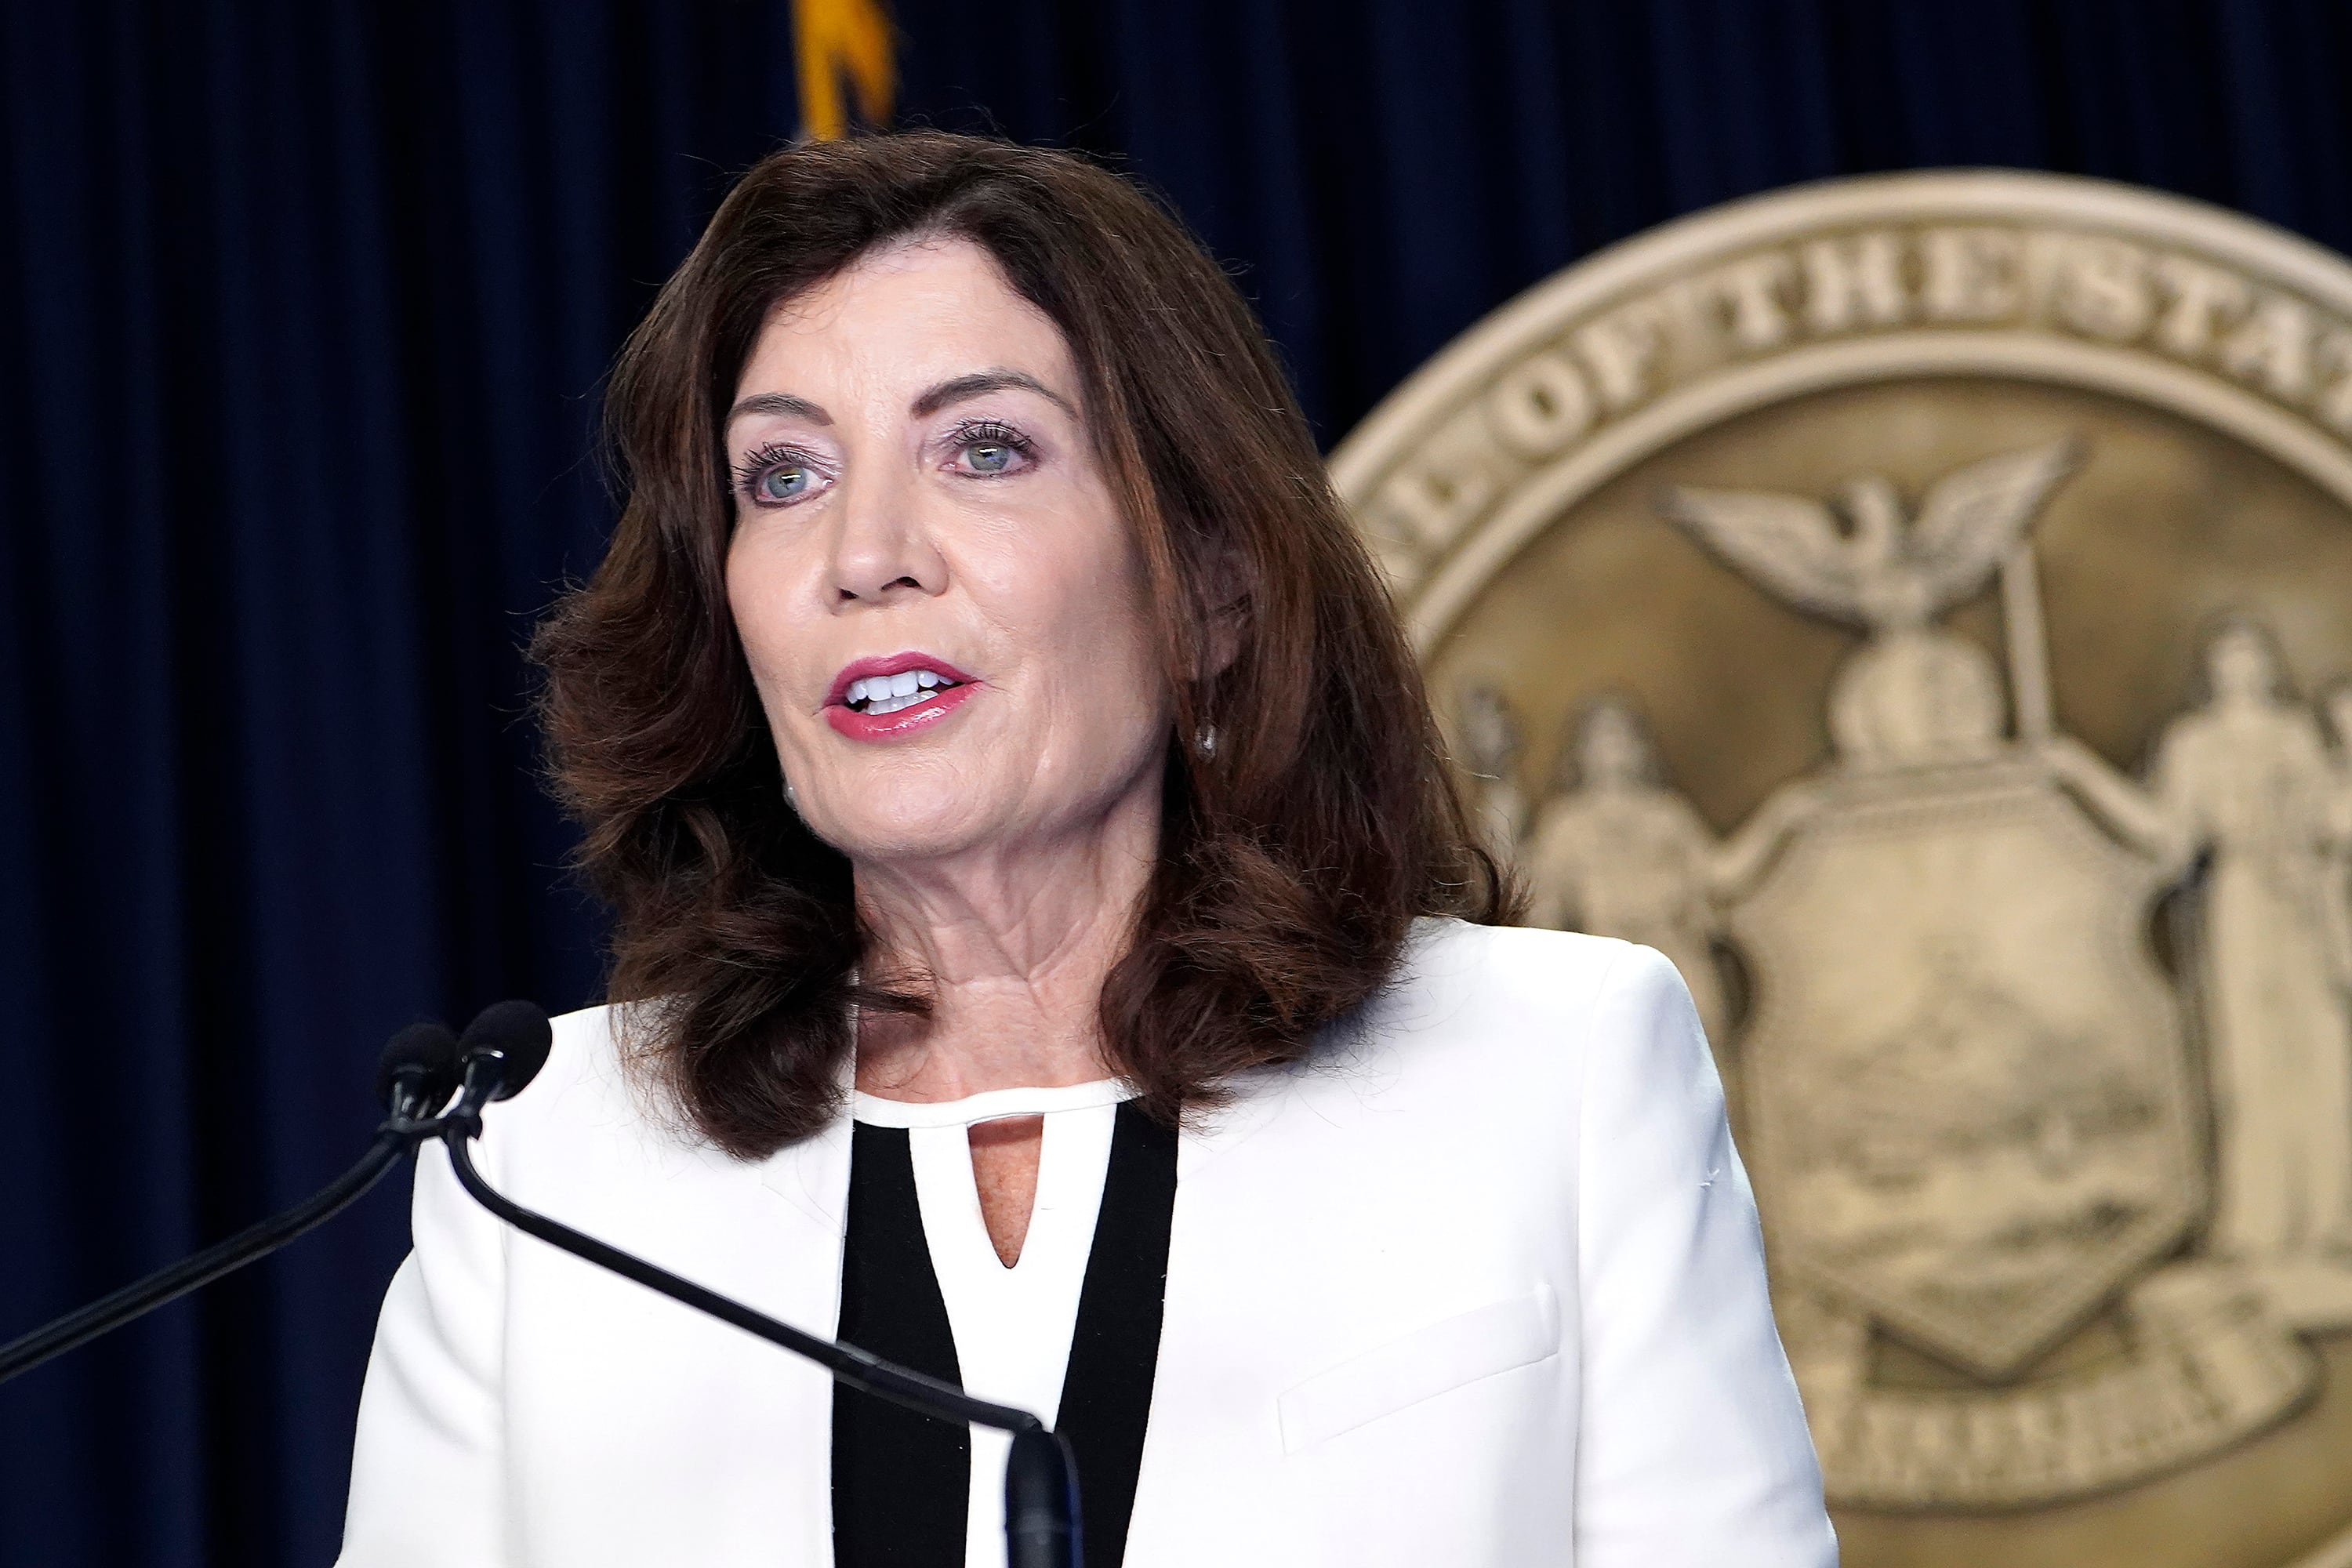 A woman with short brown hair and wearing a white suit speaks from a small microphone in front of a state seal.